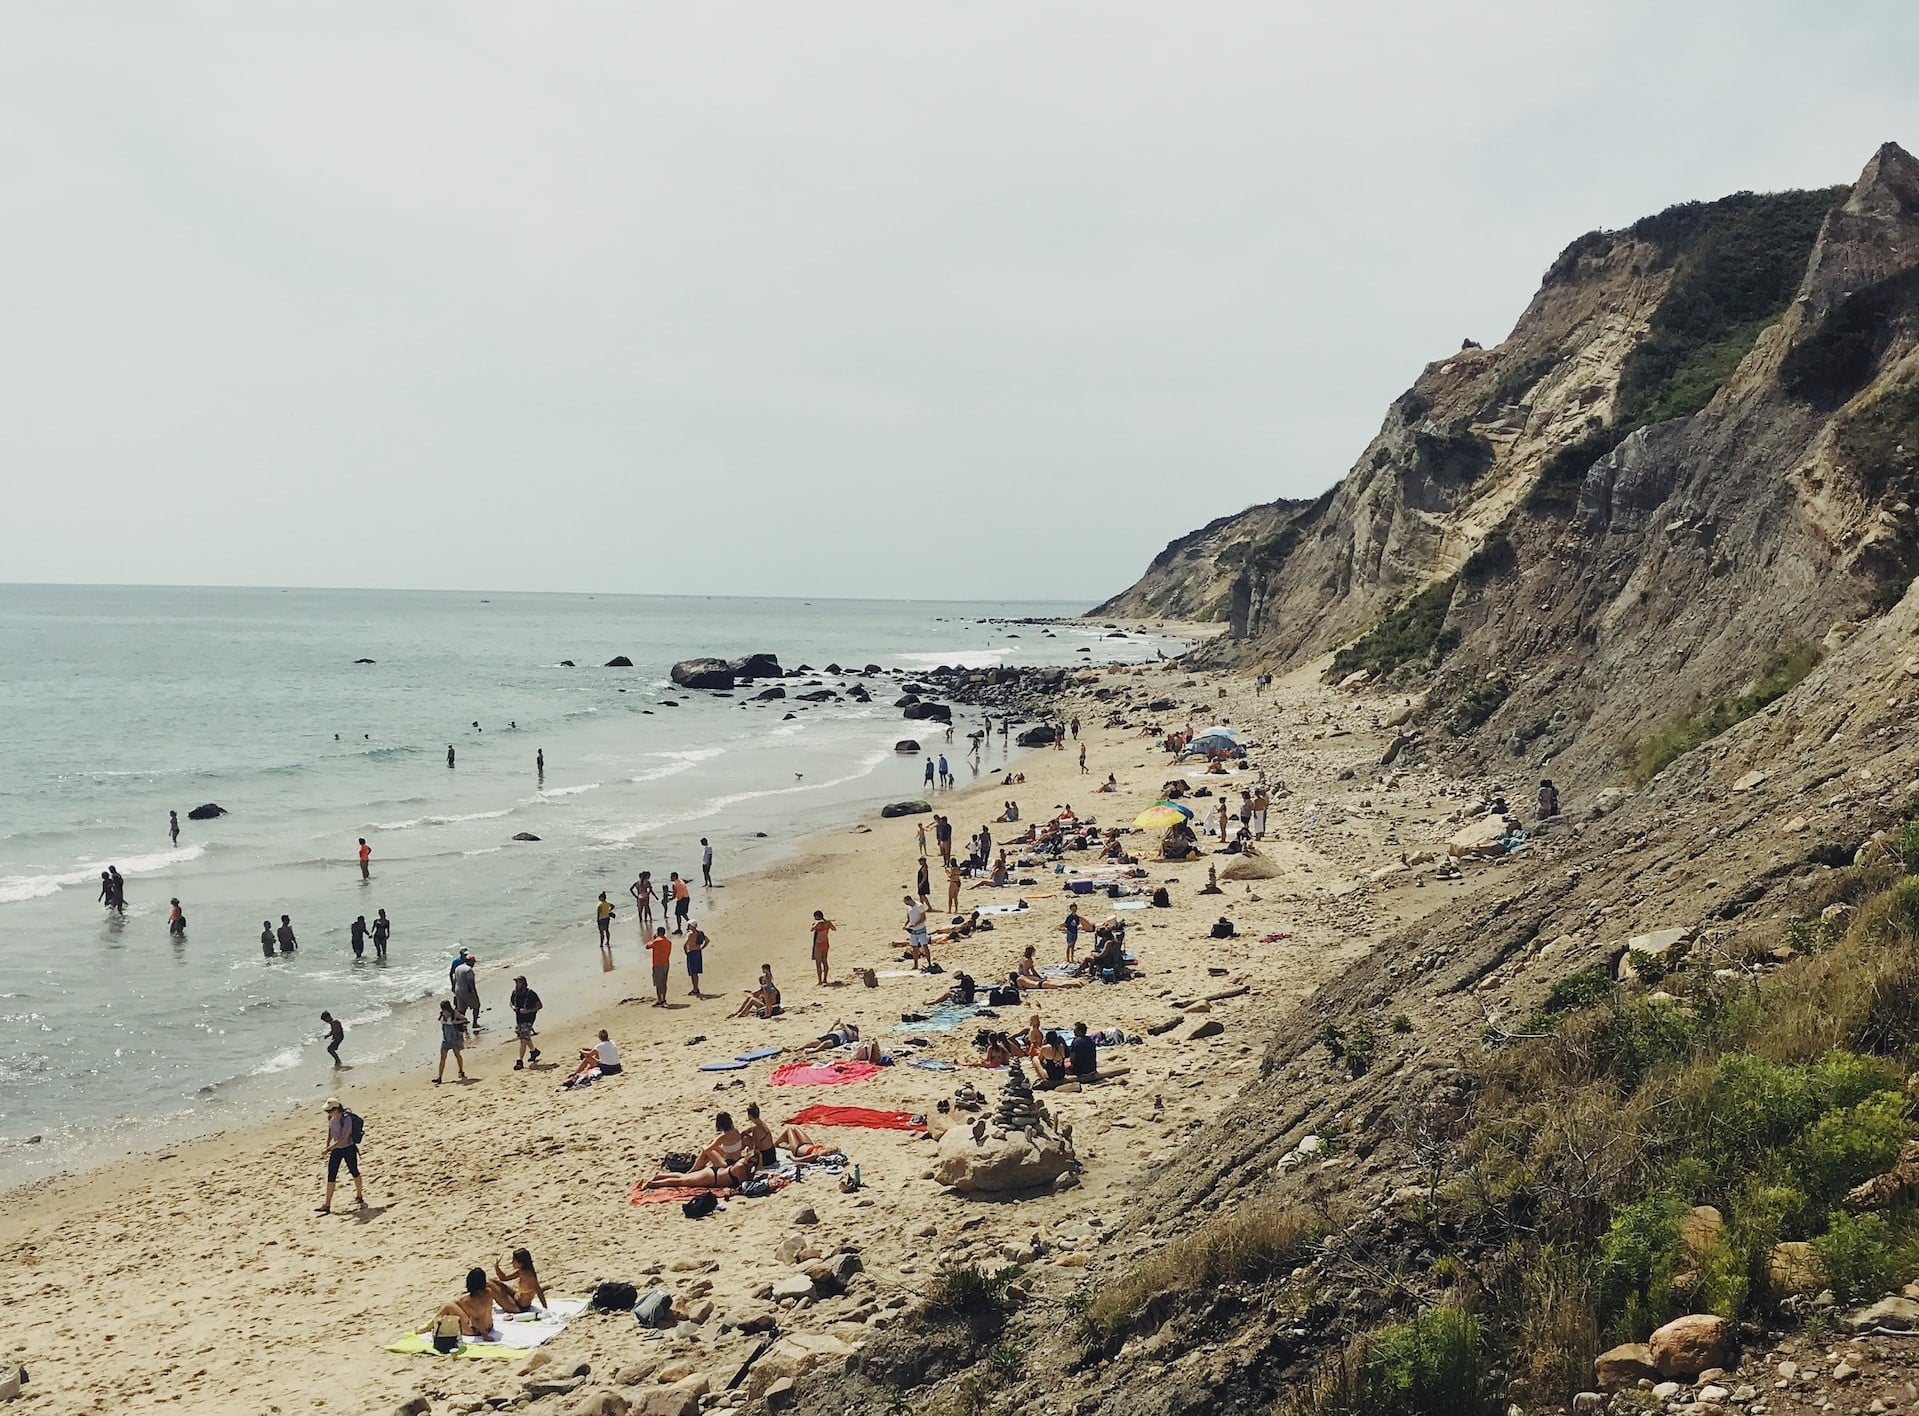 People on the beach at Mohegan Bluffs, New Shoreham, Block Island, Rhode Island, United States - one of the best dog friendly beaches in Rhode Island